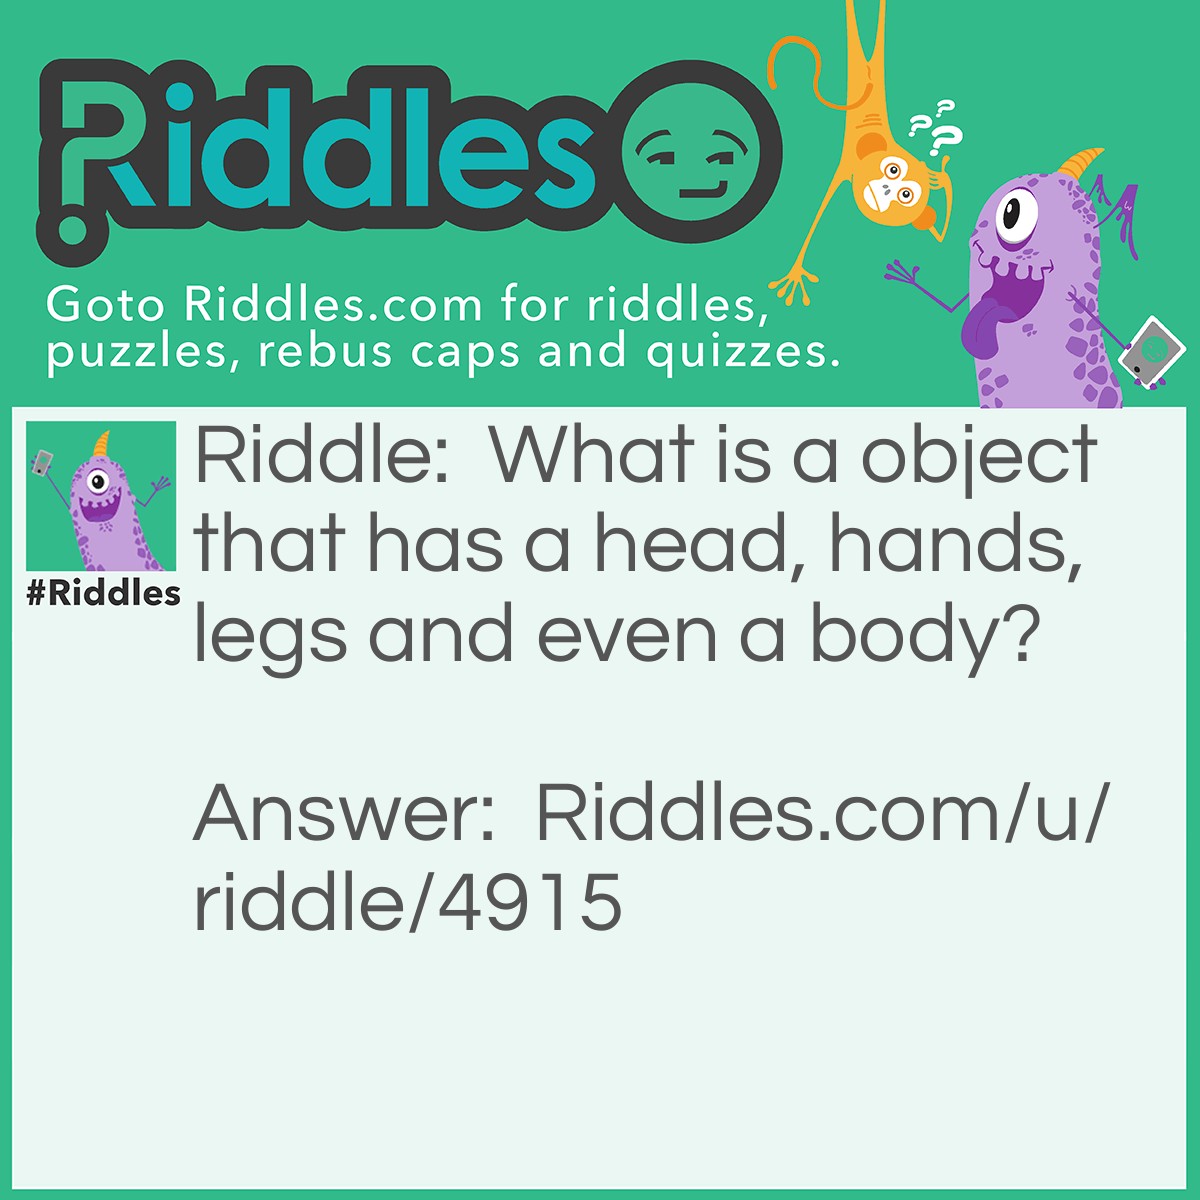 Riddle: What is a object that has a head, hands, legs and even a body? Answer: A statue.